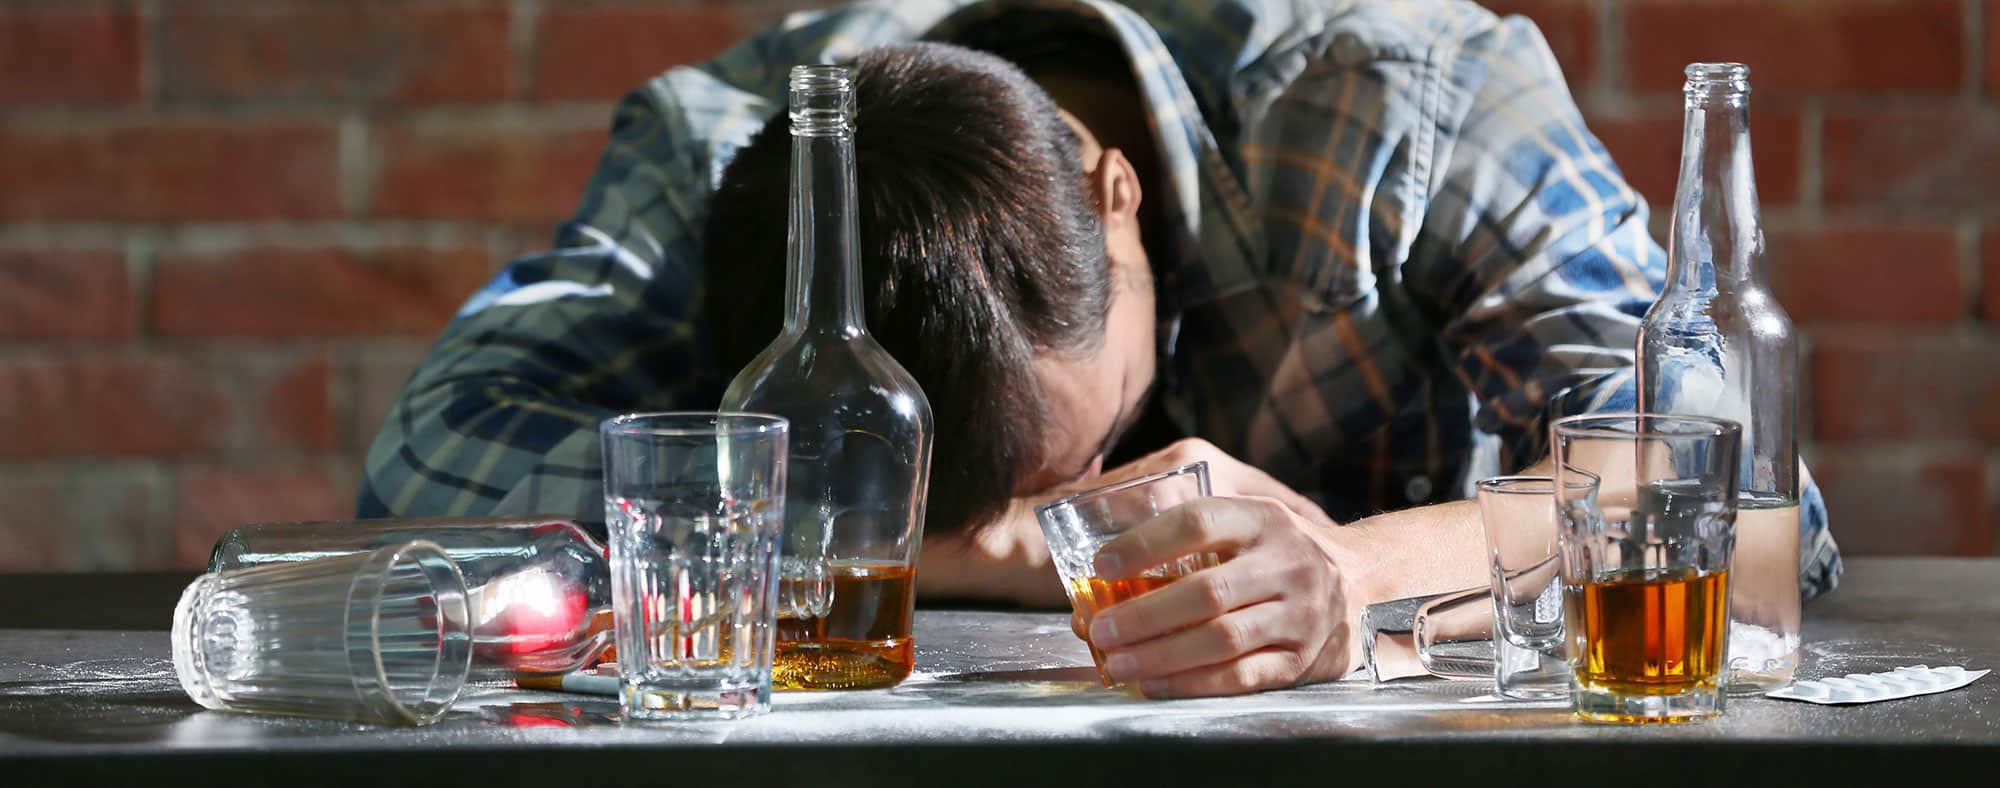 Man in plaid shirt hunched over many whiskey glasses, passed out drunk